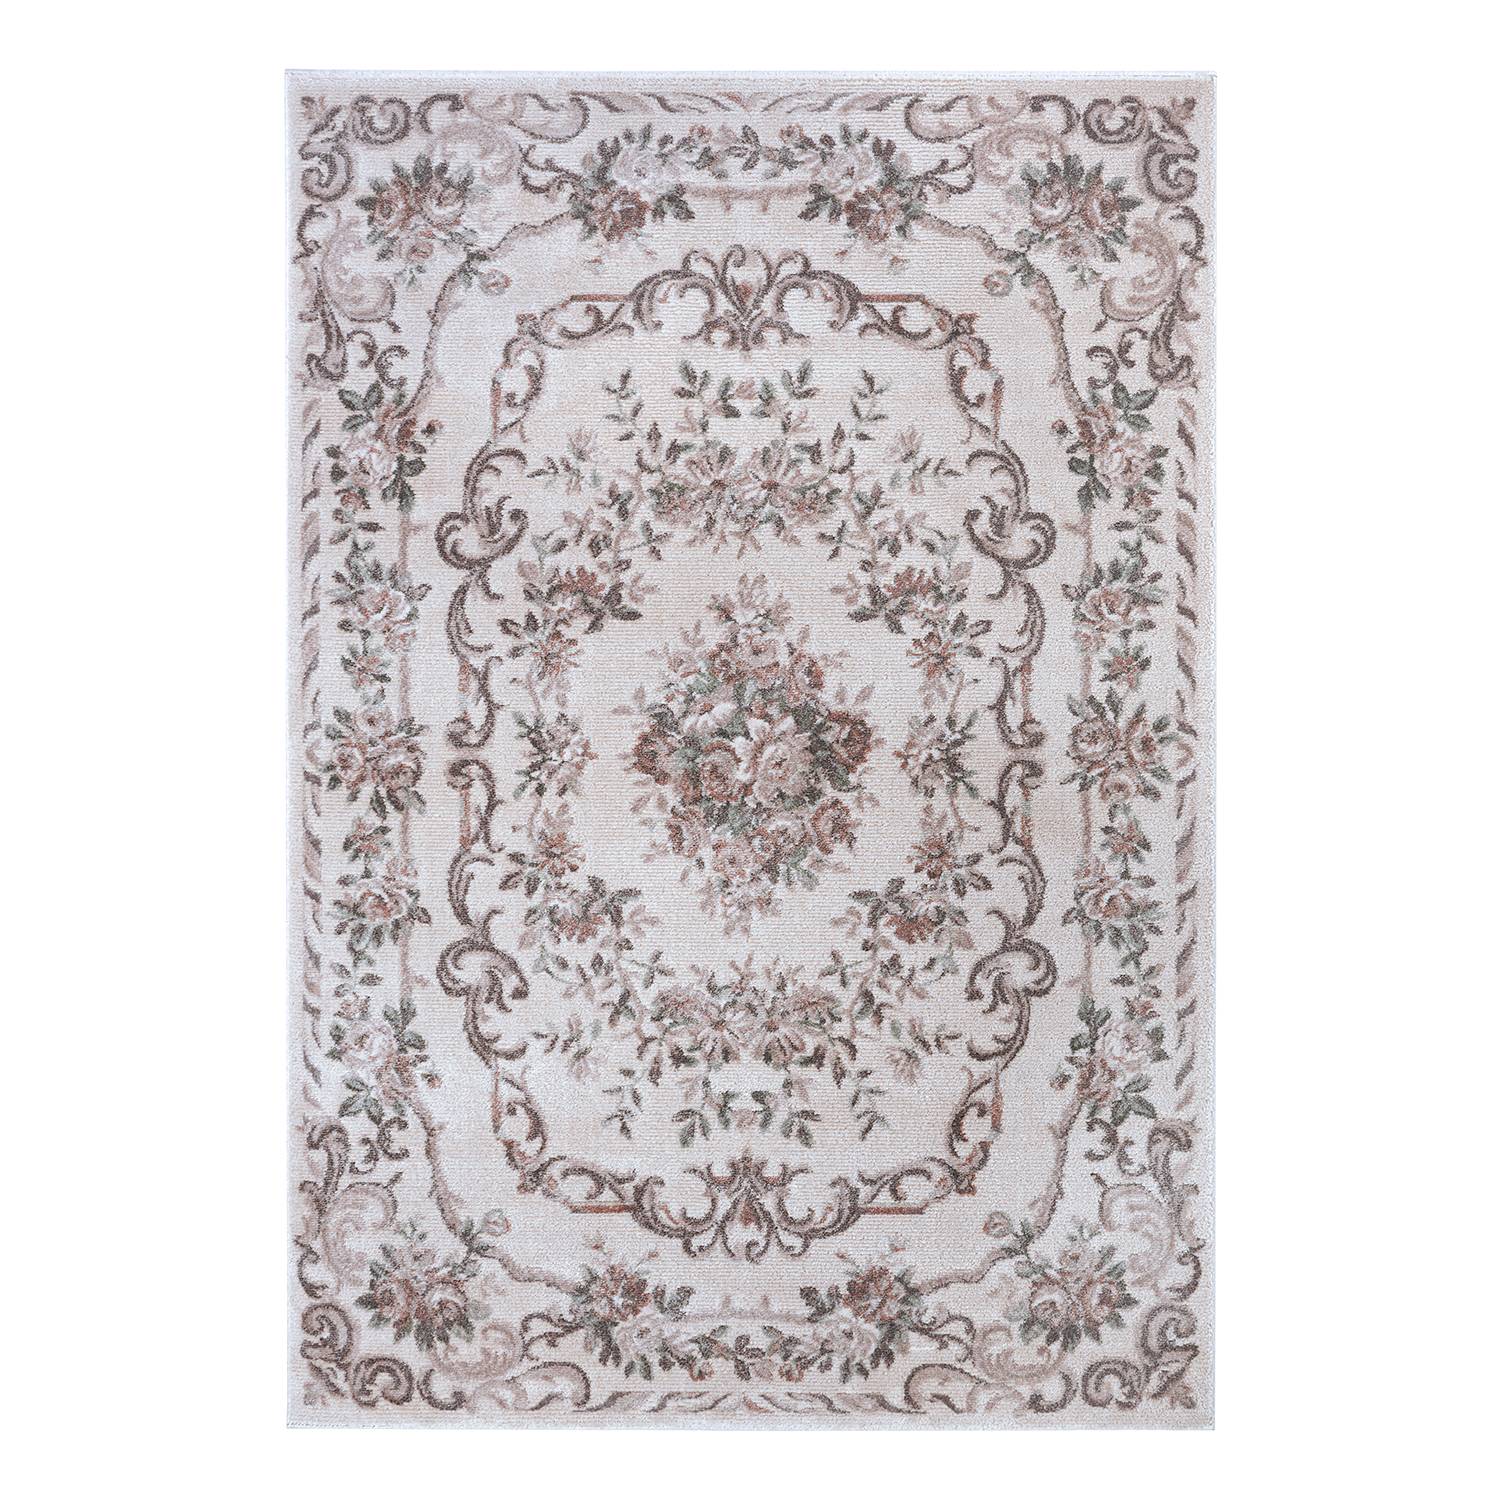 Image of Tapis Aubusson Flore 000000001000244245